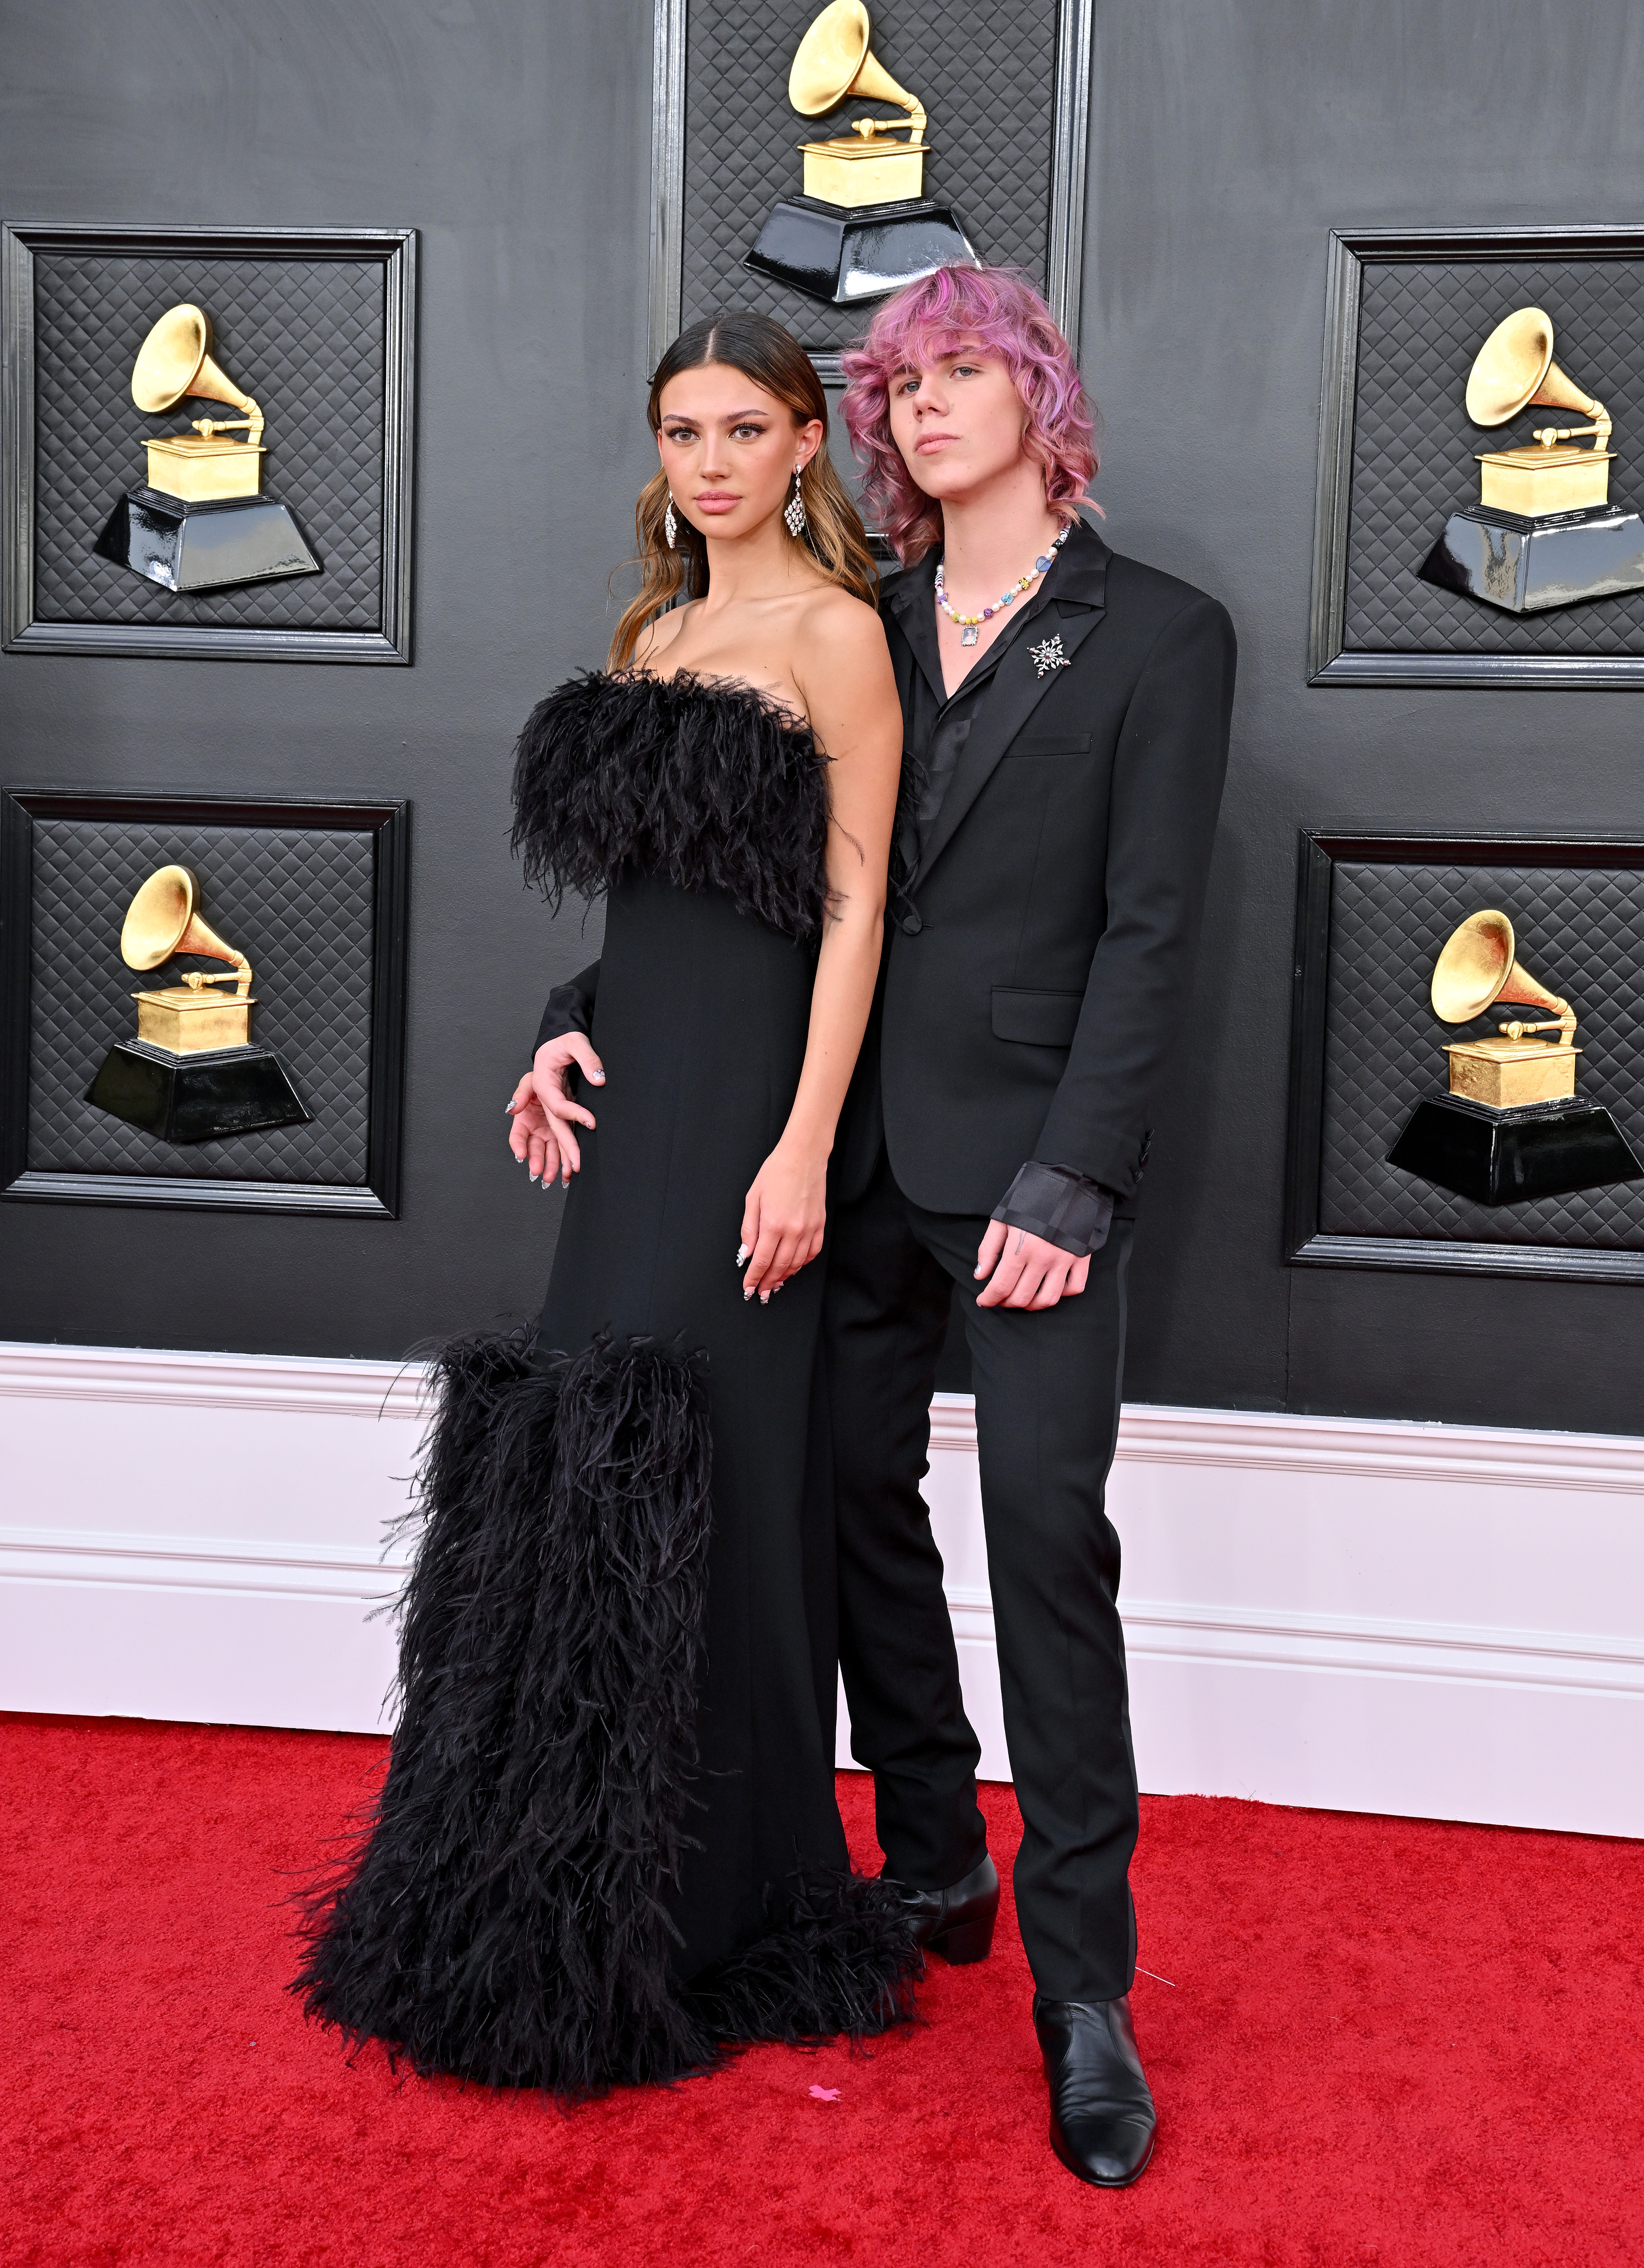 Katarina Deme  and The Kid Laroi at the 64th Annual Grammy Awards on April 3, 2022, in Las Vegas, Nevada. | Source: Getty images